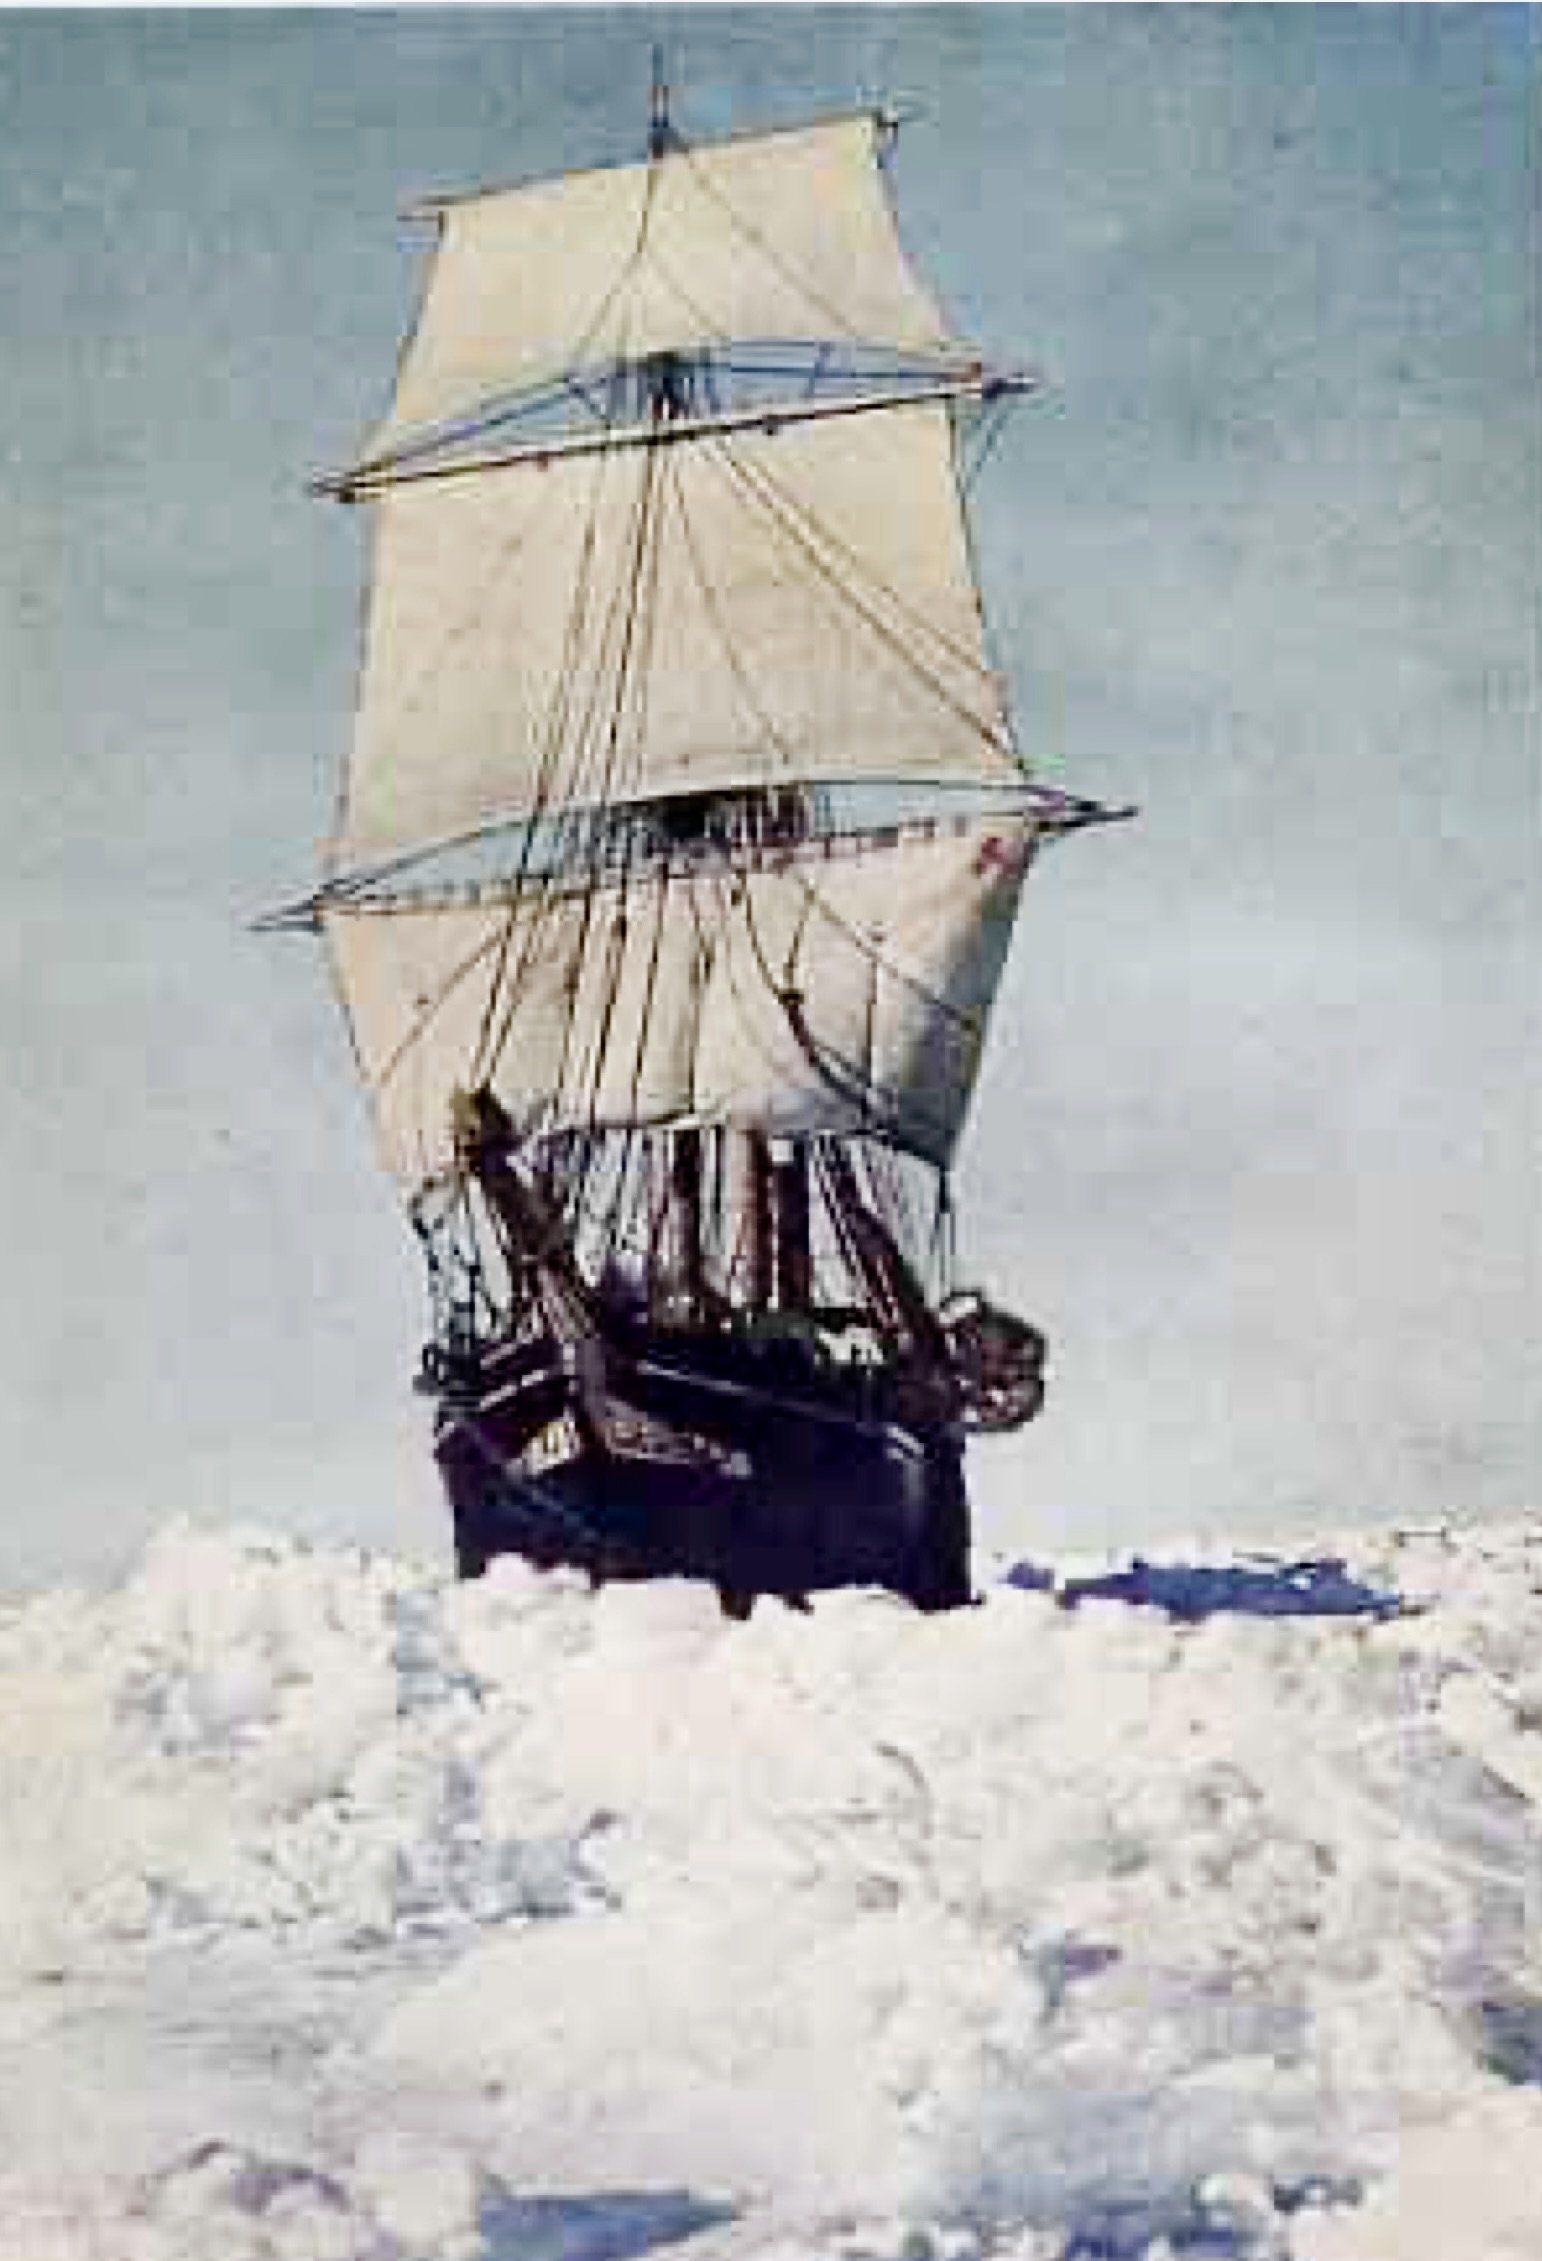 cover of Shackleton's book South